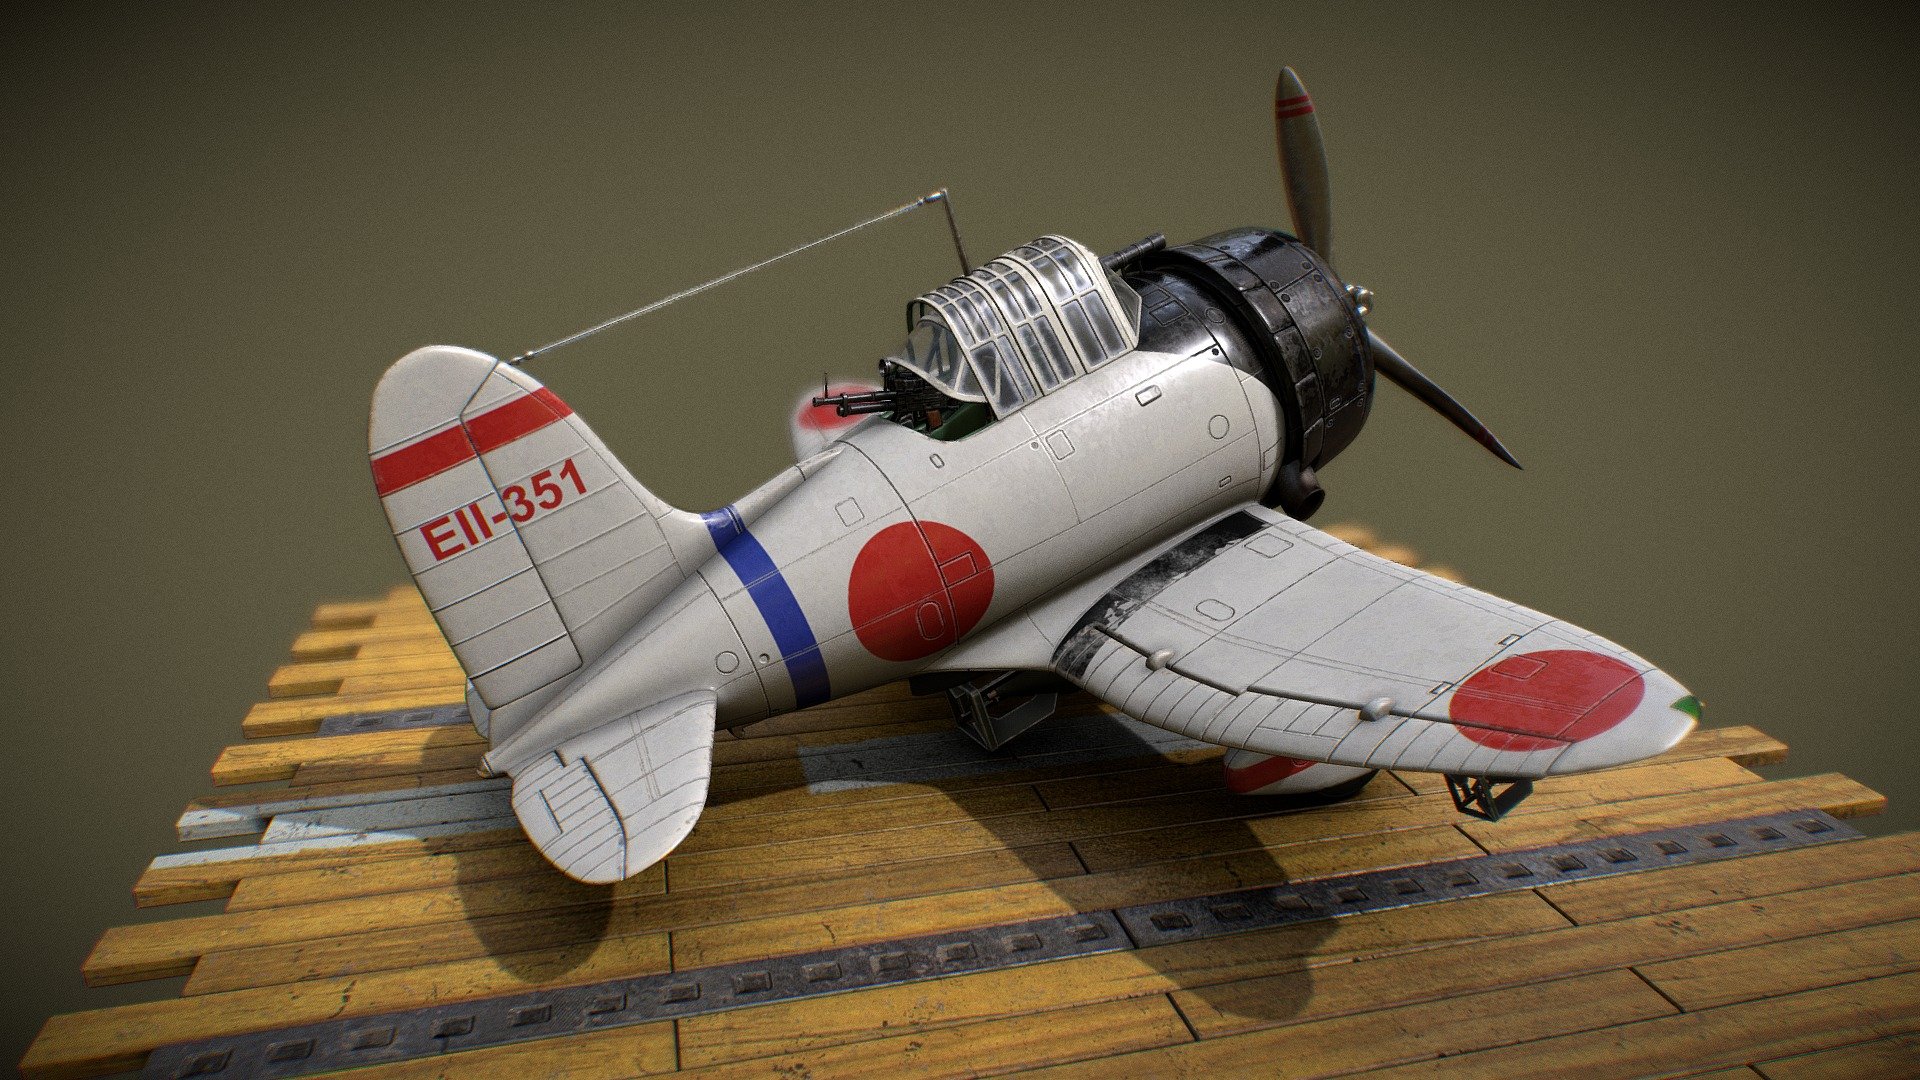 3d toon model of the famous AICHI D3A VAL bomber, version from the naval aviation of the Japanese Empire (Dai-Nippon Teikoku Kaigun Kōkū Hombu). 3dsmax modeling, 3dcoat texturing 3d model